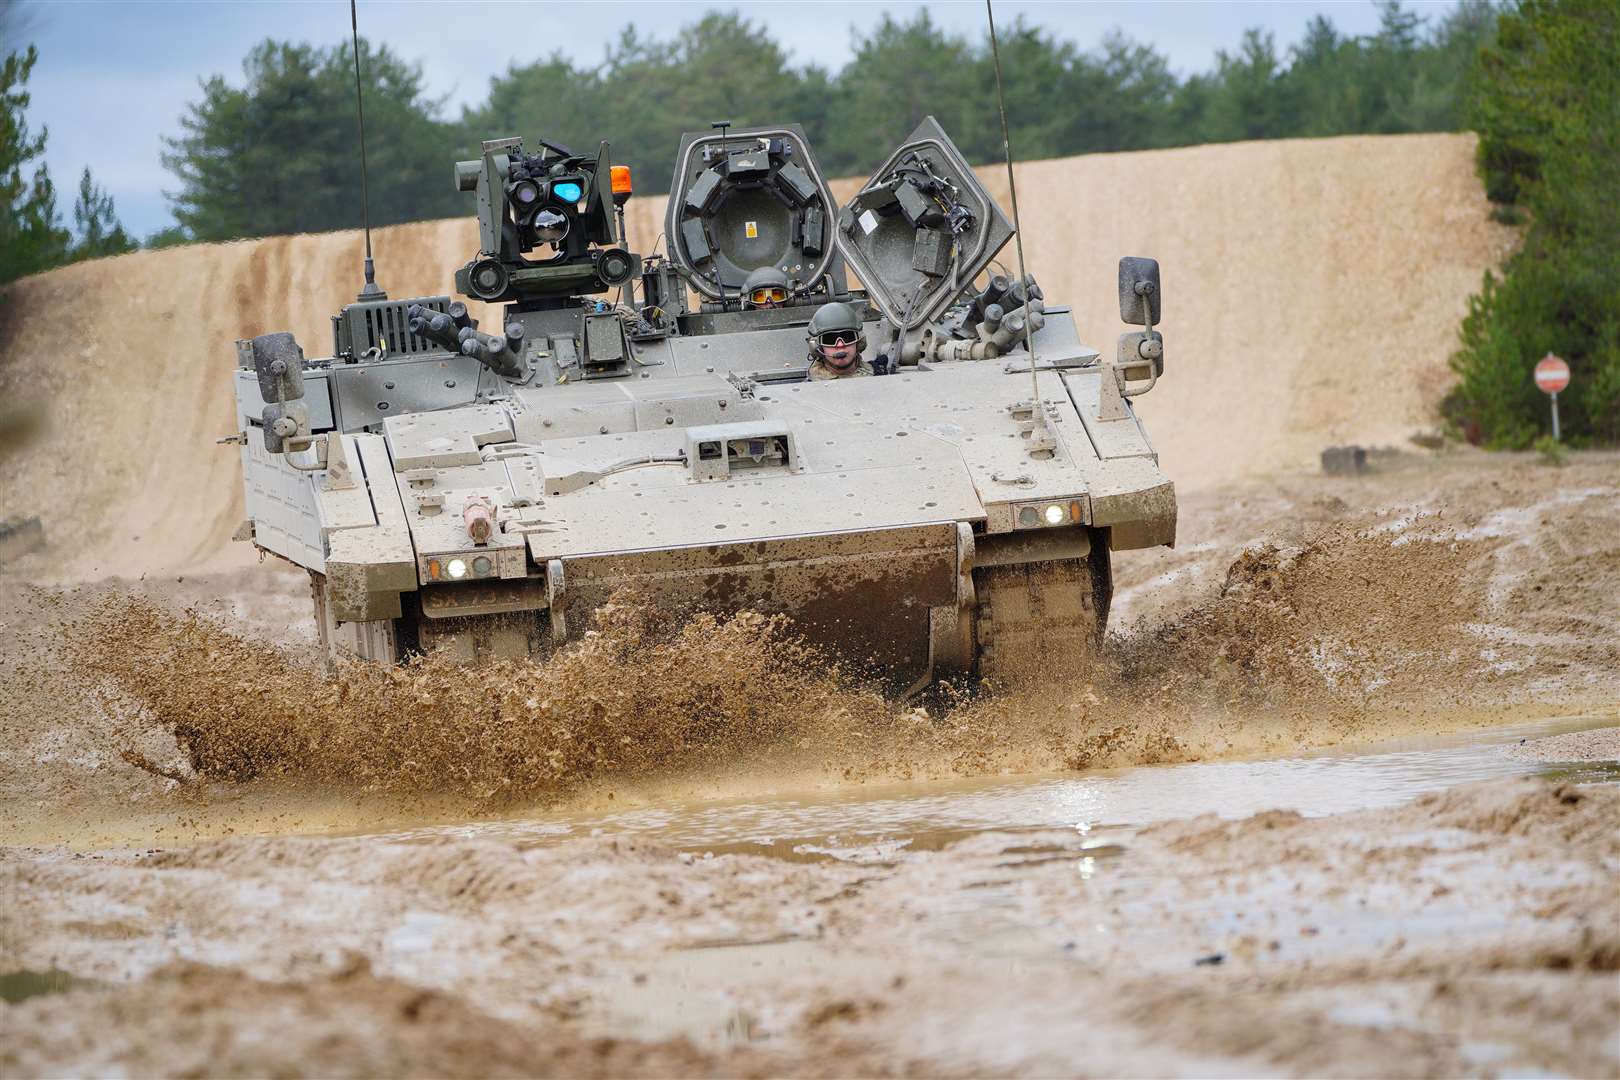 Delays in procurement of new kit, such as the troubled Ajax armoured vehicle, had left gaps in military capability, the PAC found (Ben Birchall/PA)